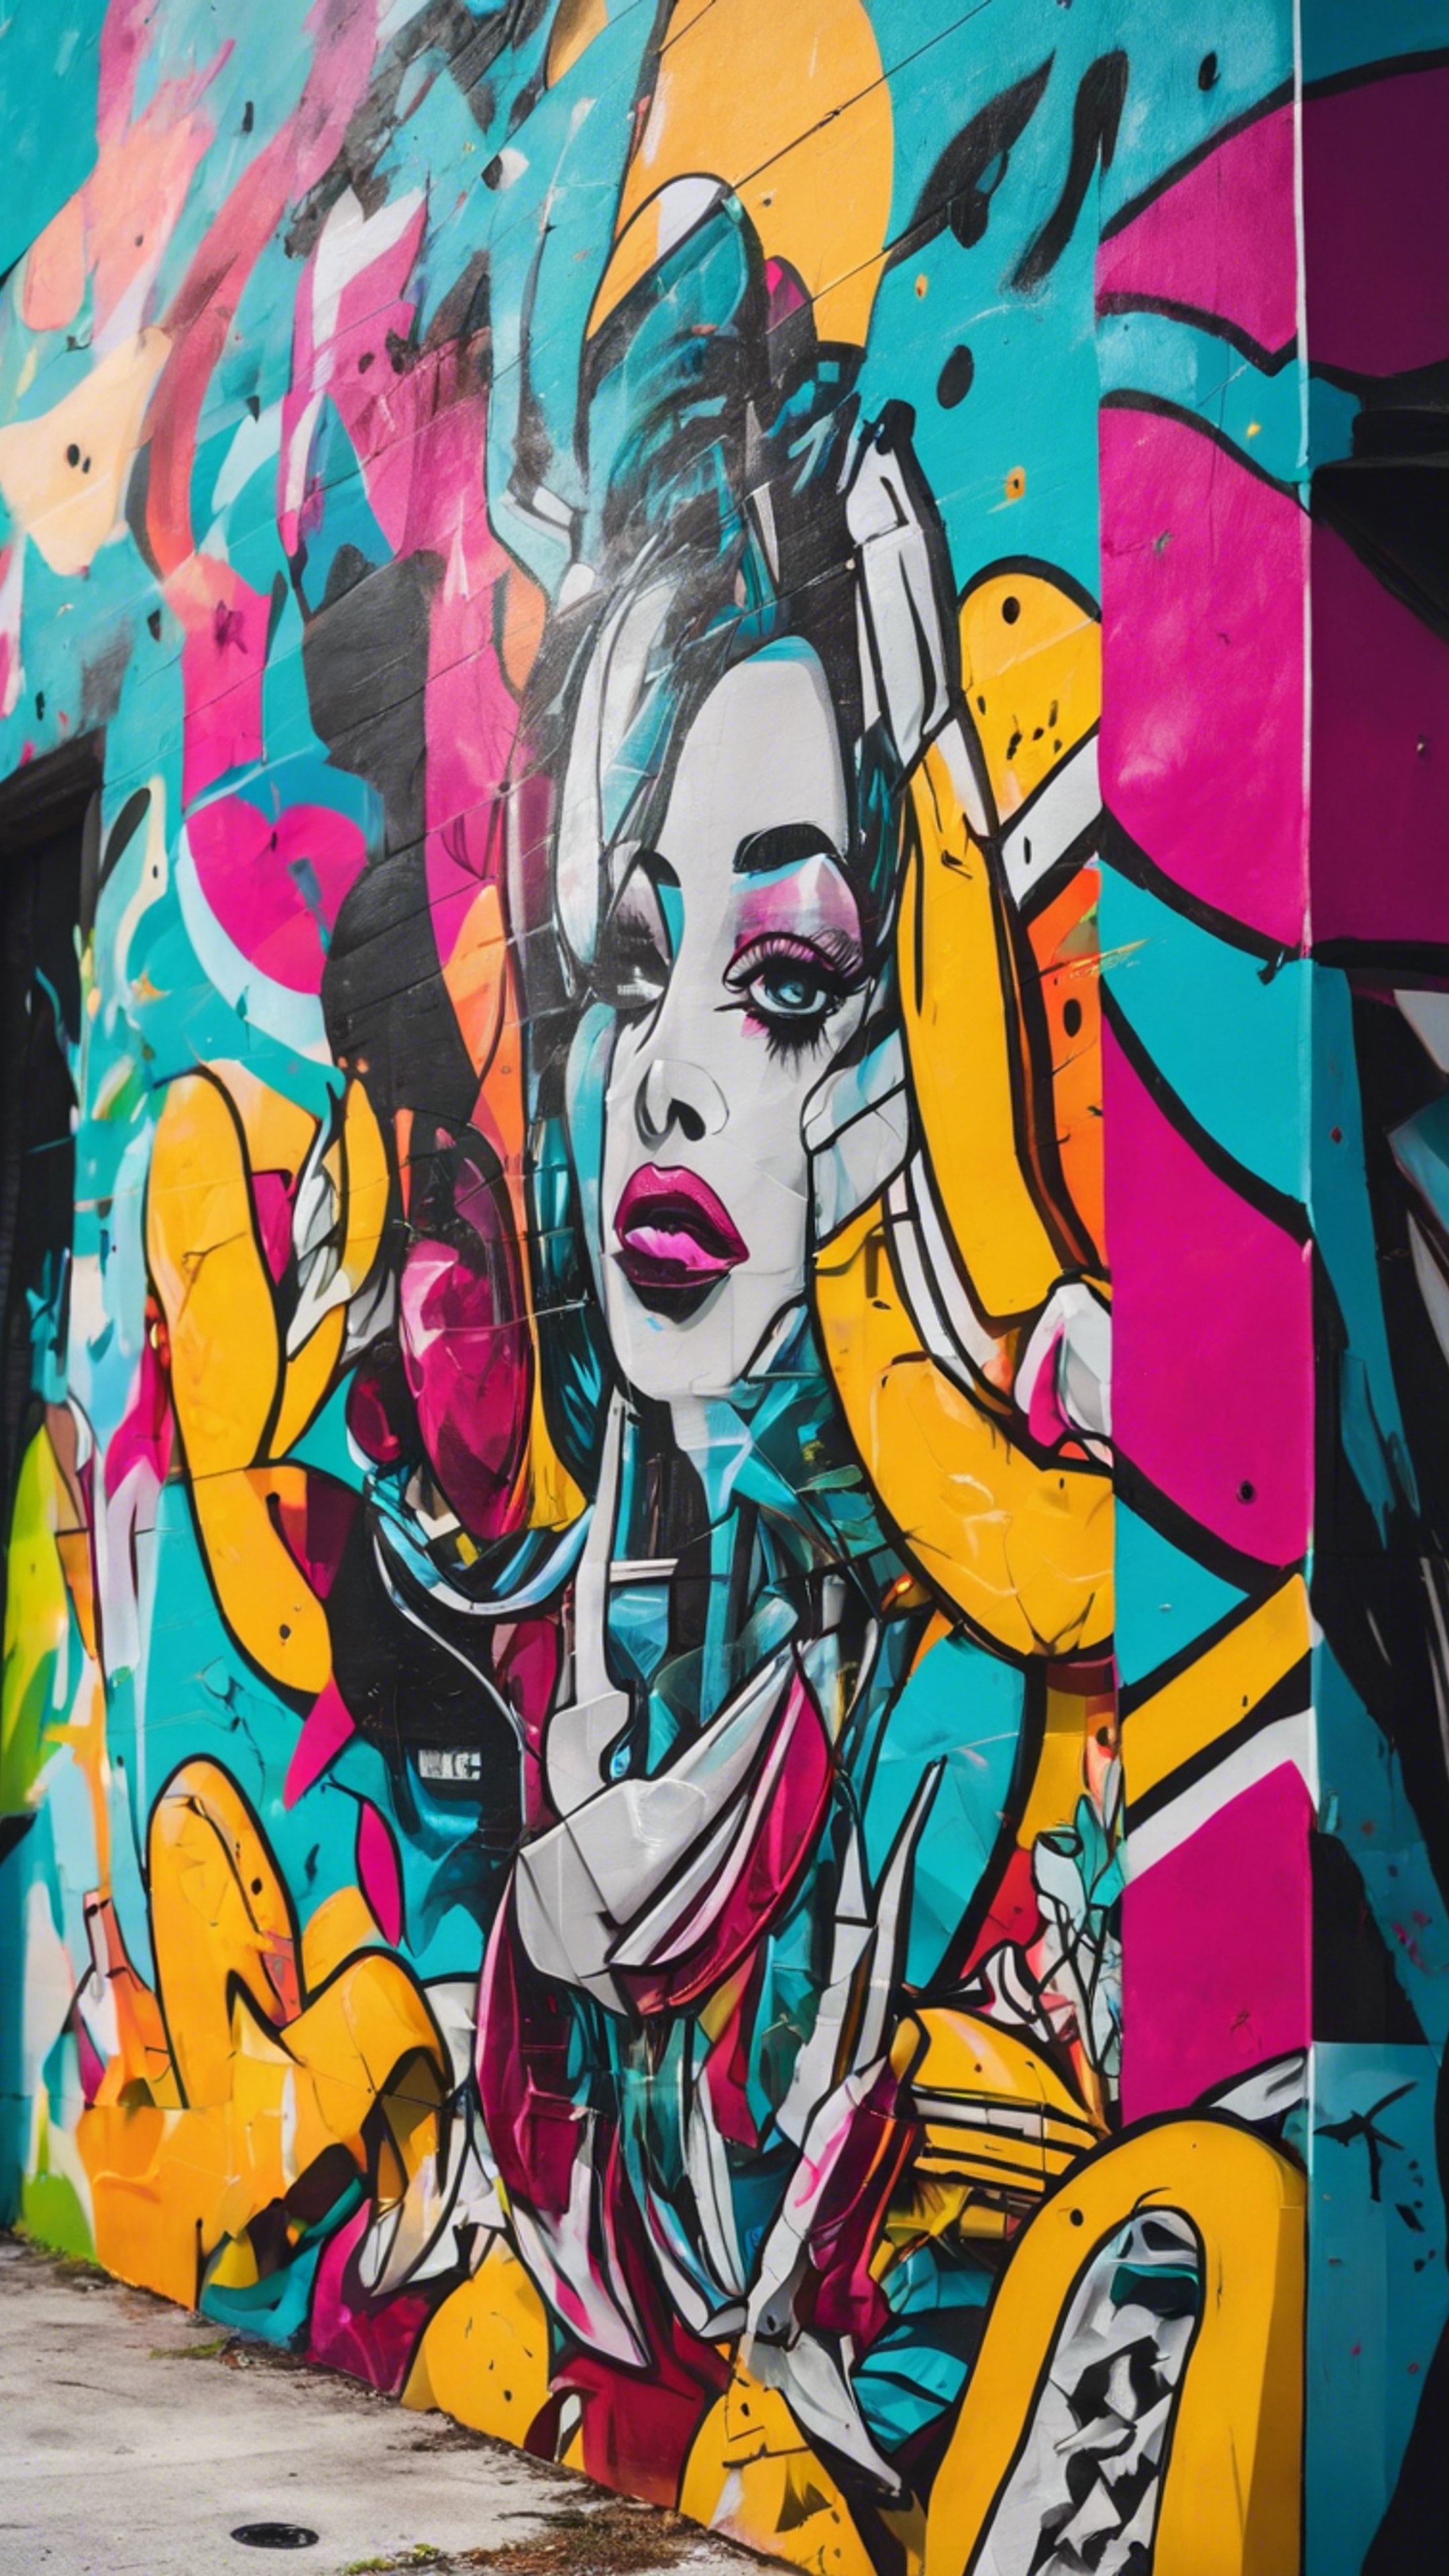 A vibrant street art mural in Wynwood, Miami, featuring abstract art and bright colors. Tapeta[fc74442468964623923a]